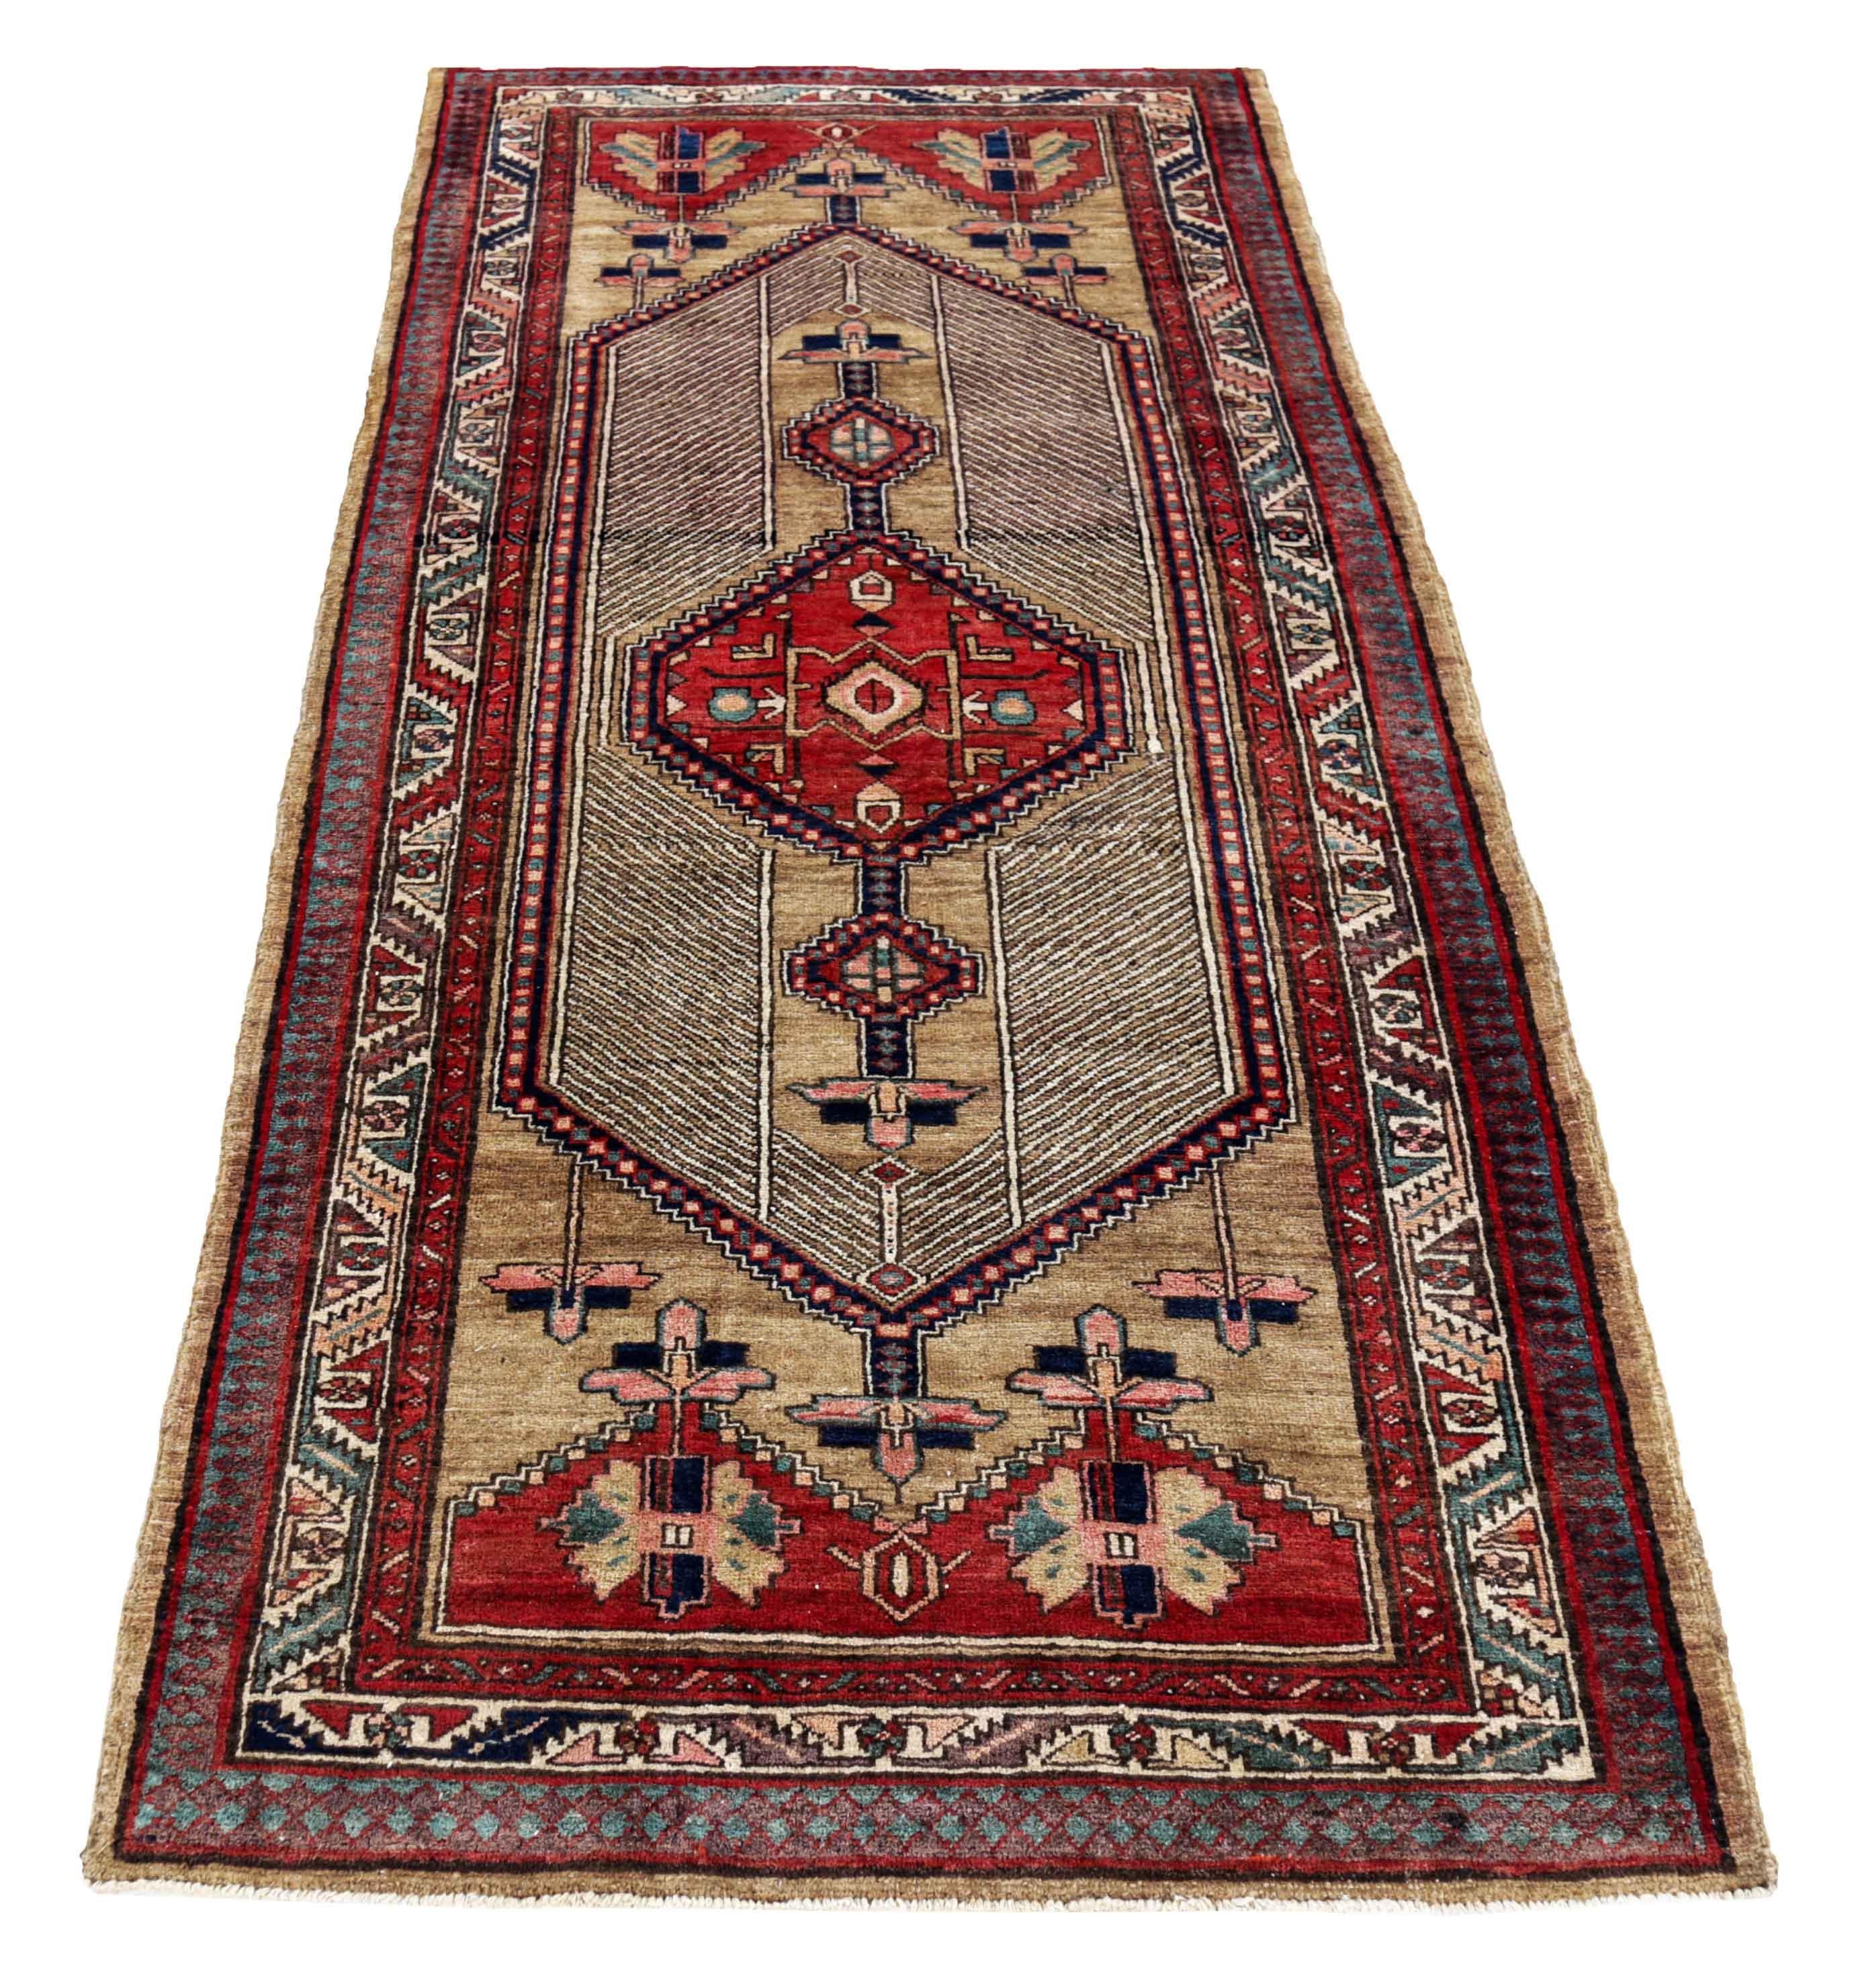 Antique Persian area rug handwoven from the finest sheep’s wool. It’s colored with all-natural vegetable dyes that are safe for humans and pets. It’s a traditional Sarab design handwoven by expert artisans. It’s a lovely area rug that can be